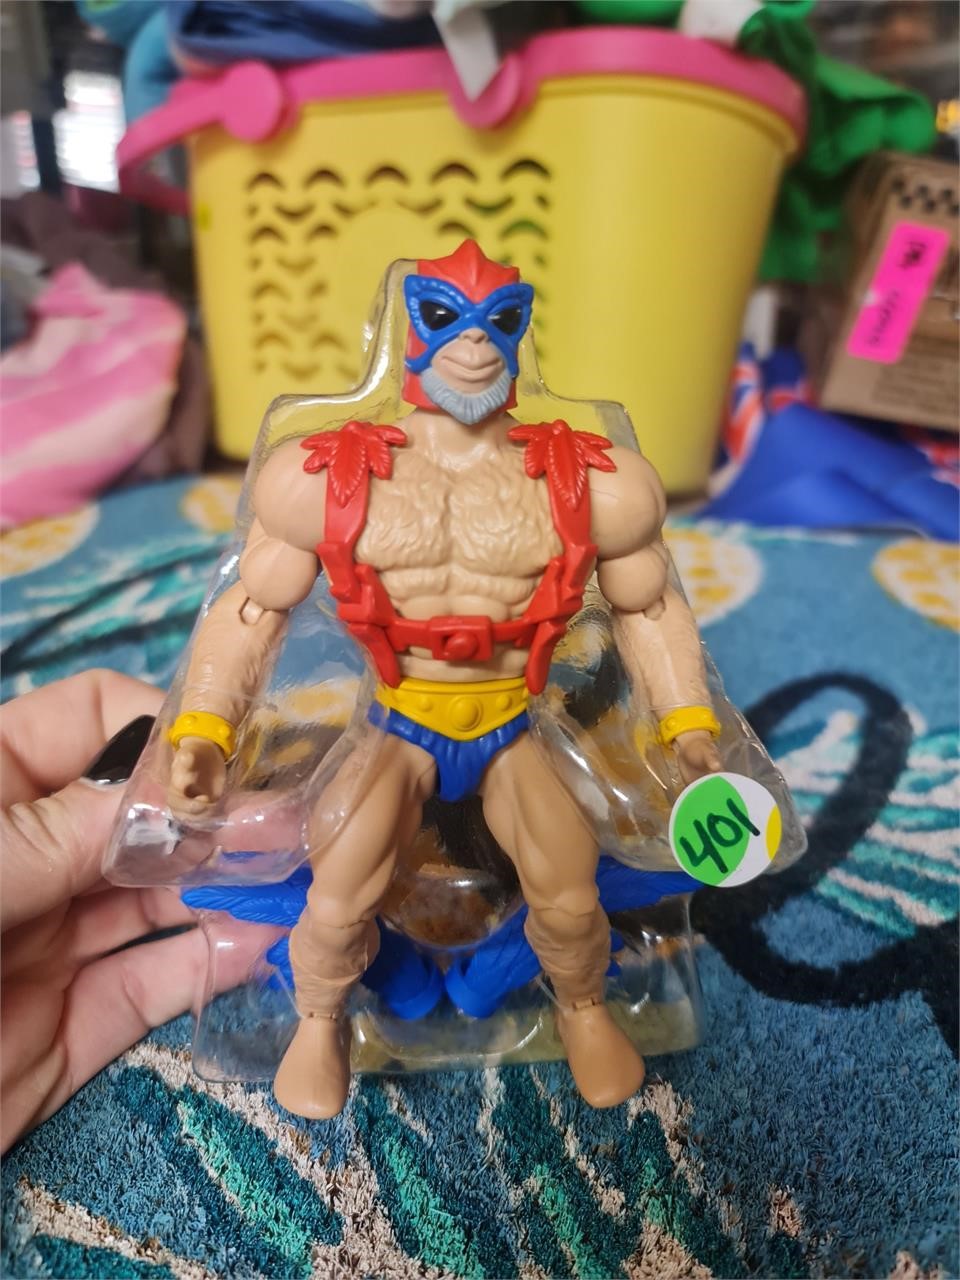 Masters of the universe guy